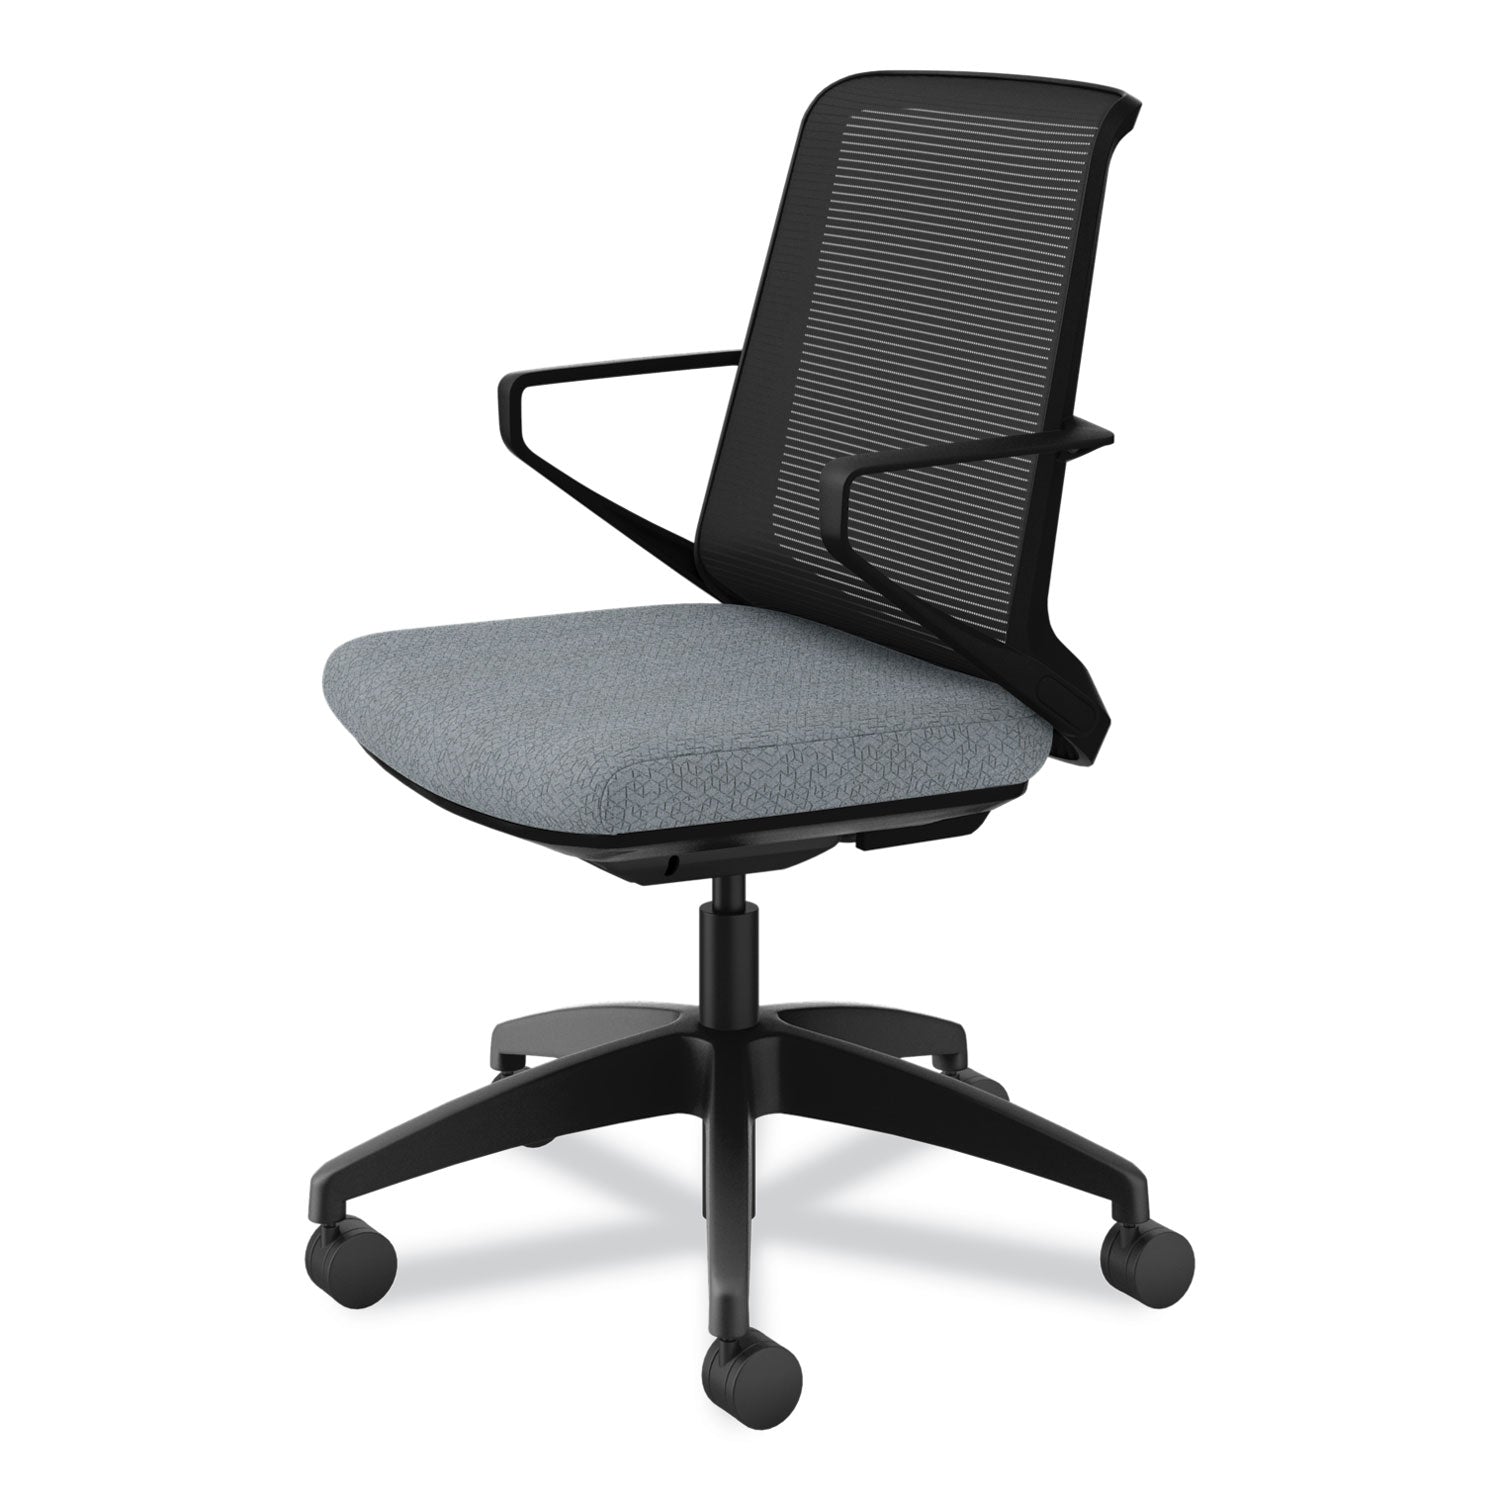 cliq-office-chair-supports-up-to-300-lb-17-to-22-seat-height-basalt-seat-black-back-base-ships-in-7-10-business-days_honclqimapx25t - 3